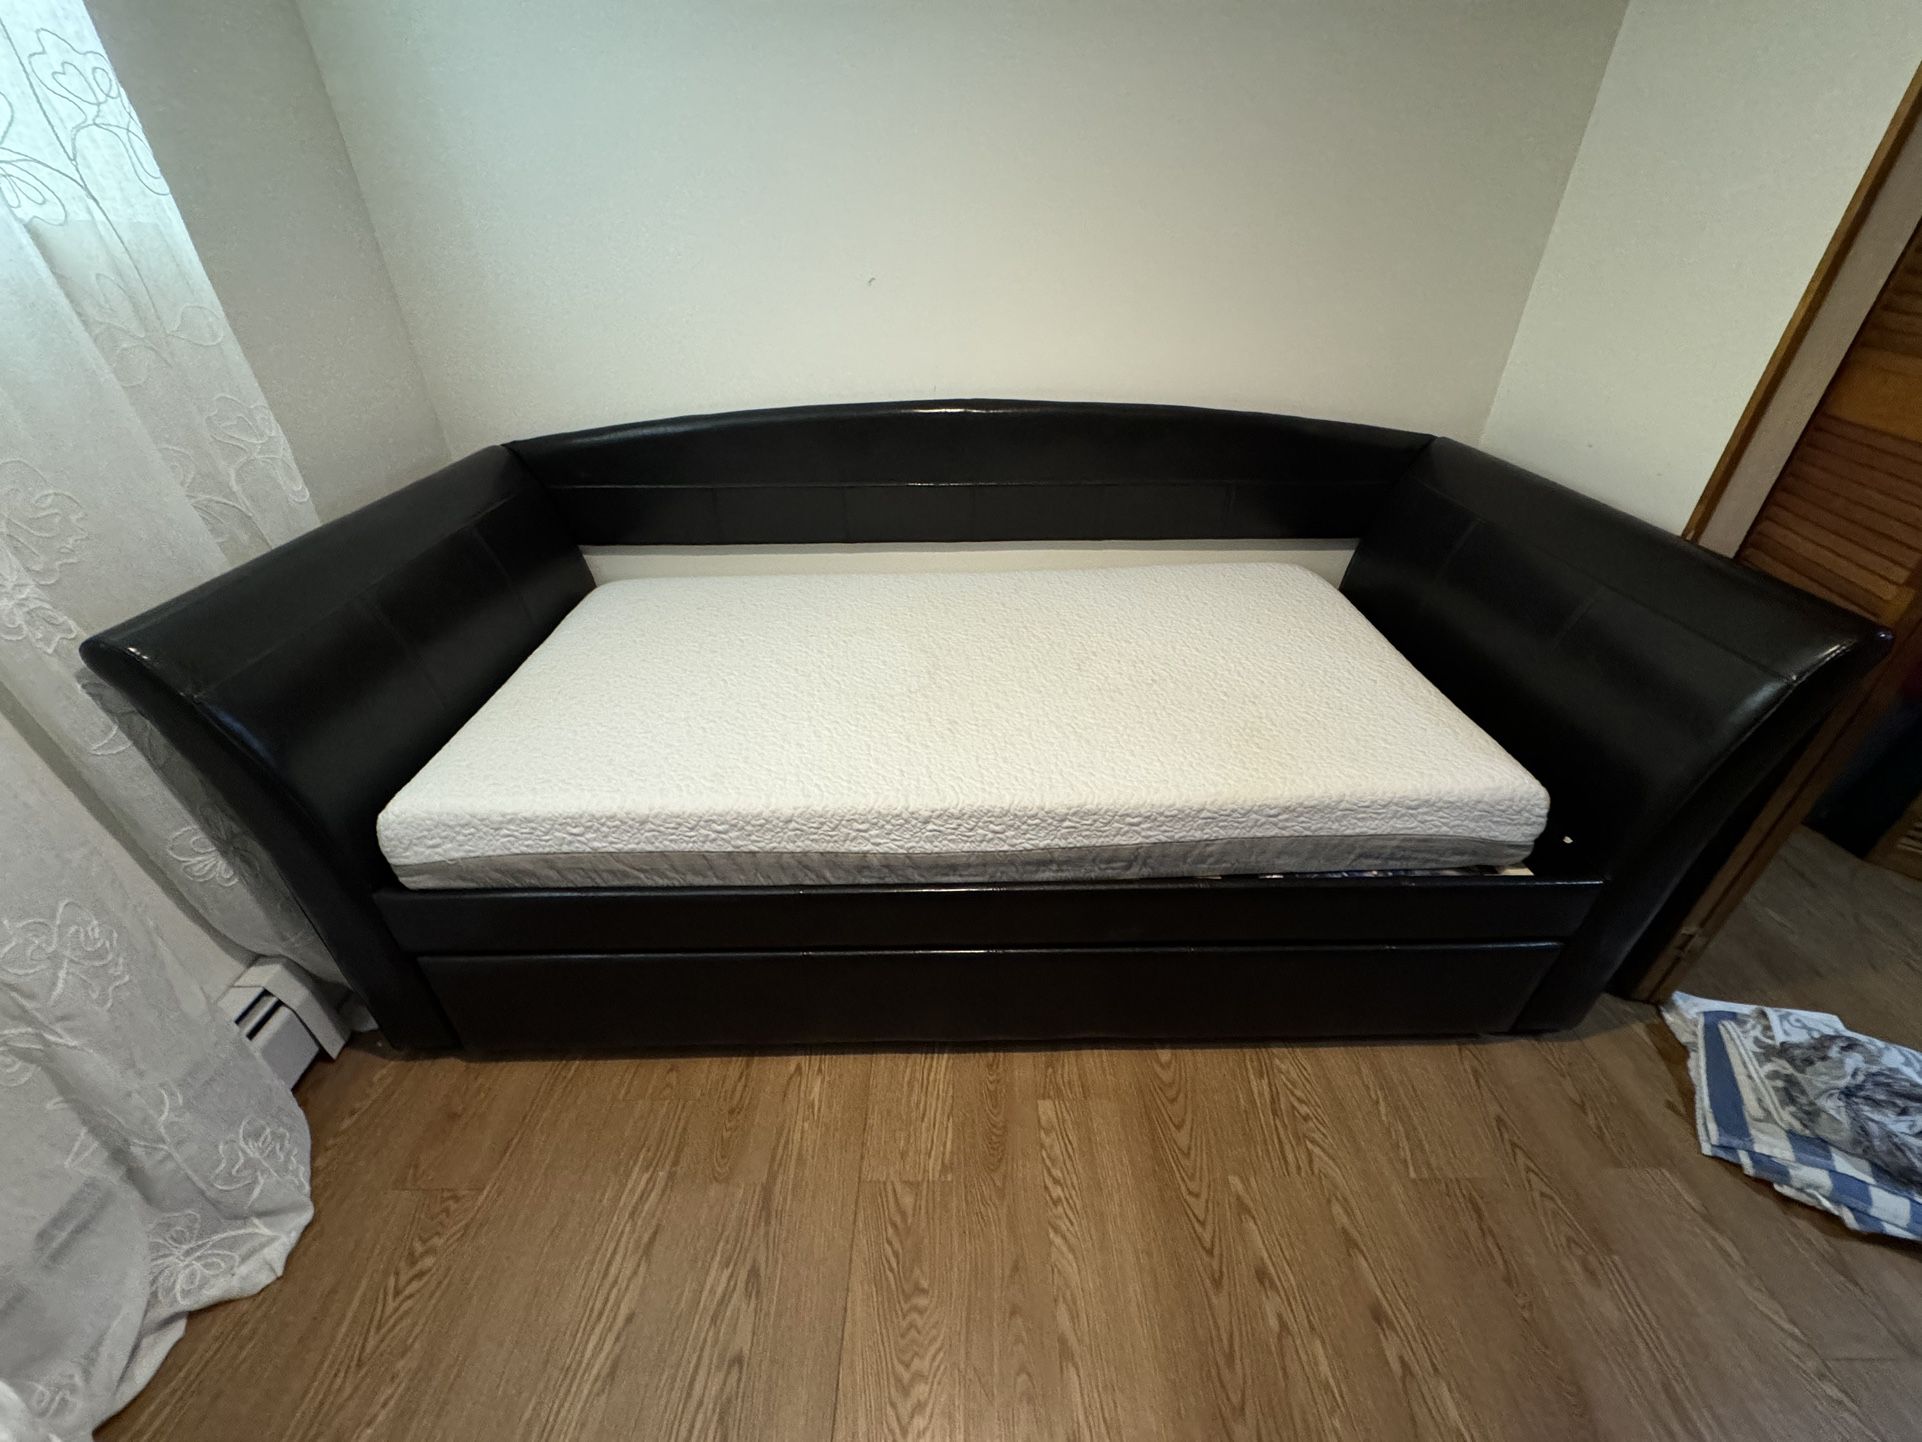 Day Bed Two Twin Size Beds In Great Condition $250